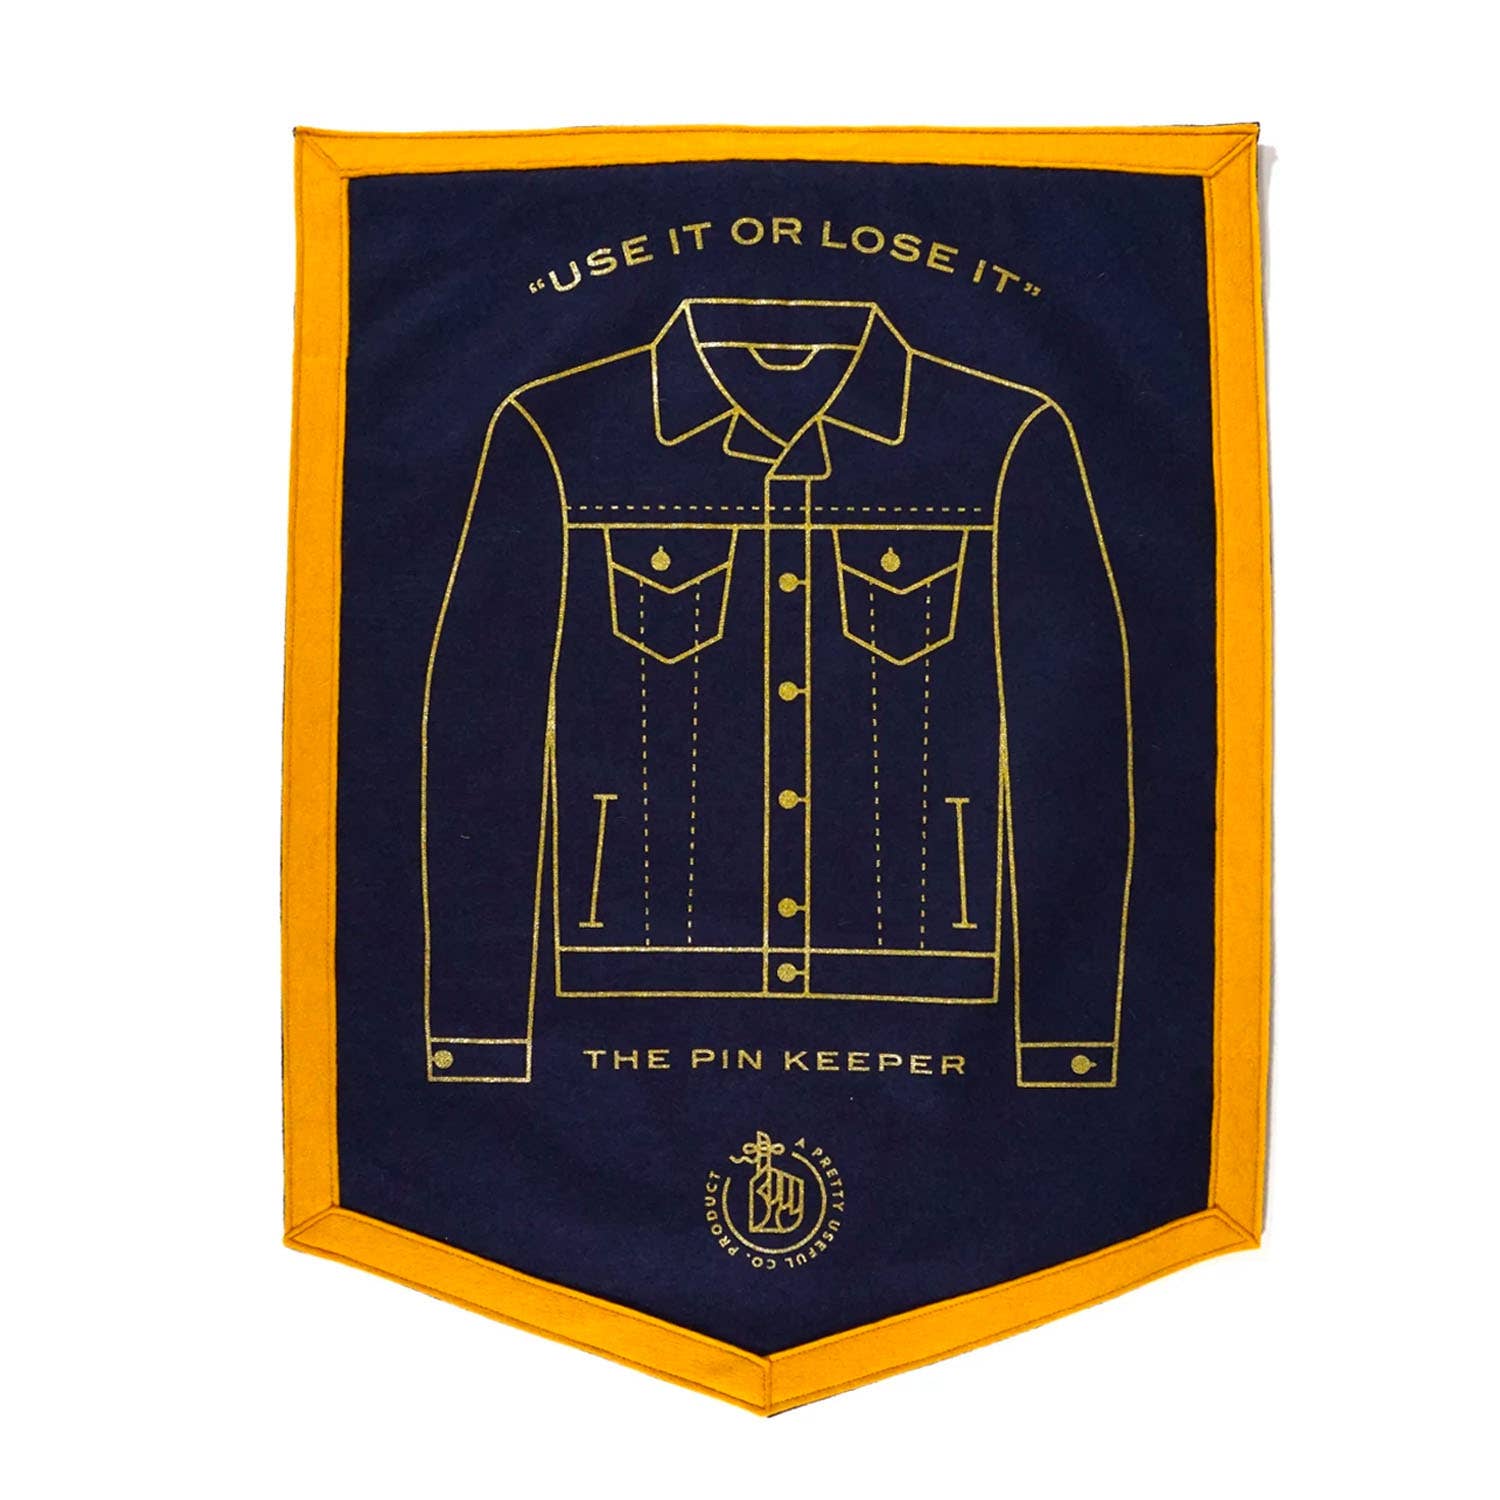 Oxford Pennant Pin Keepers - Denim Jacket Camp Flag